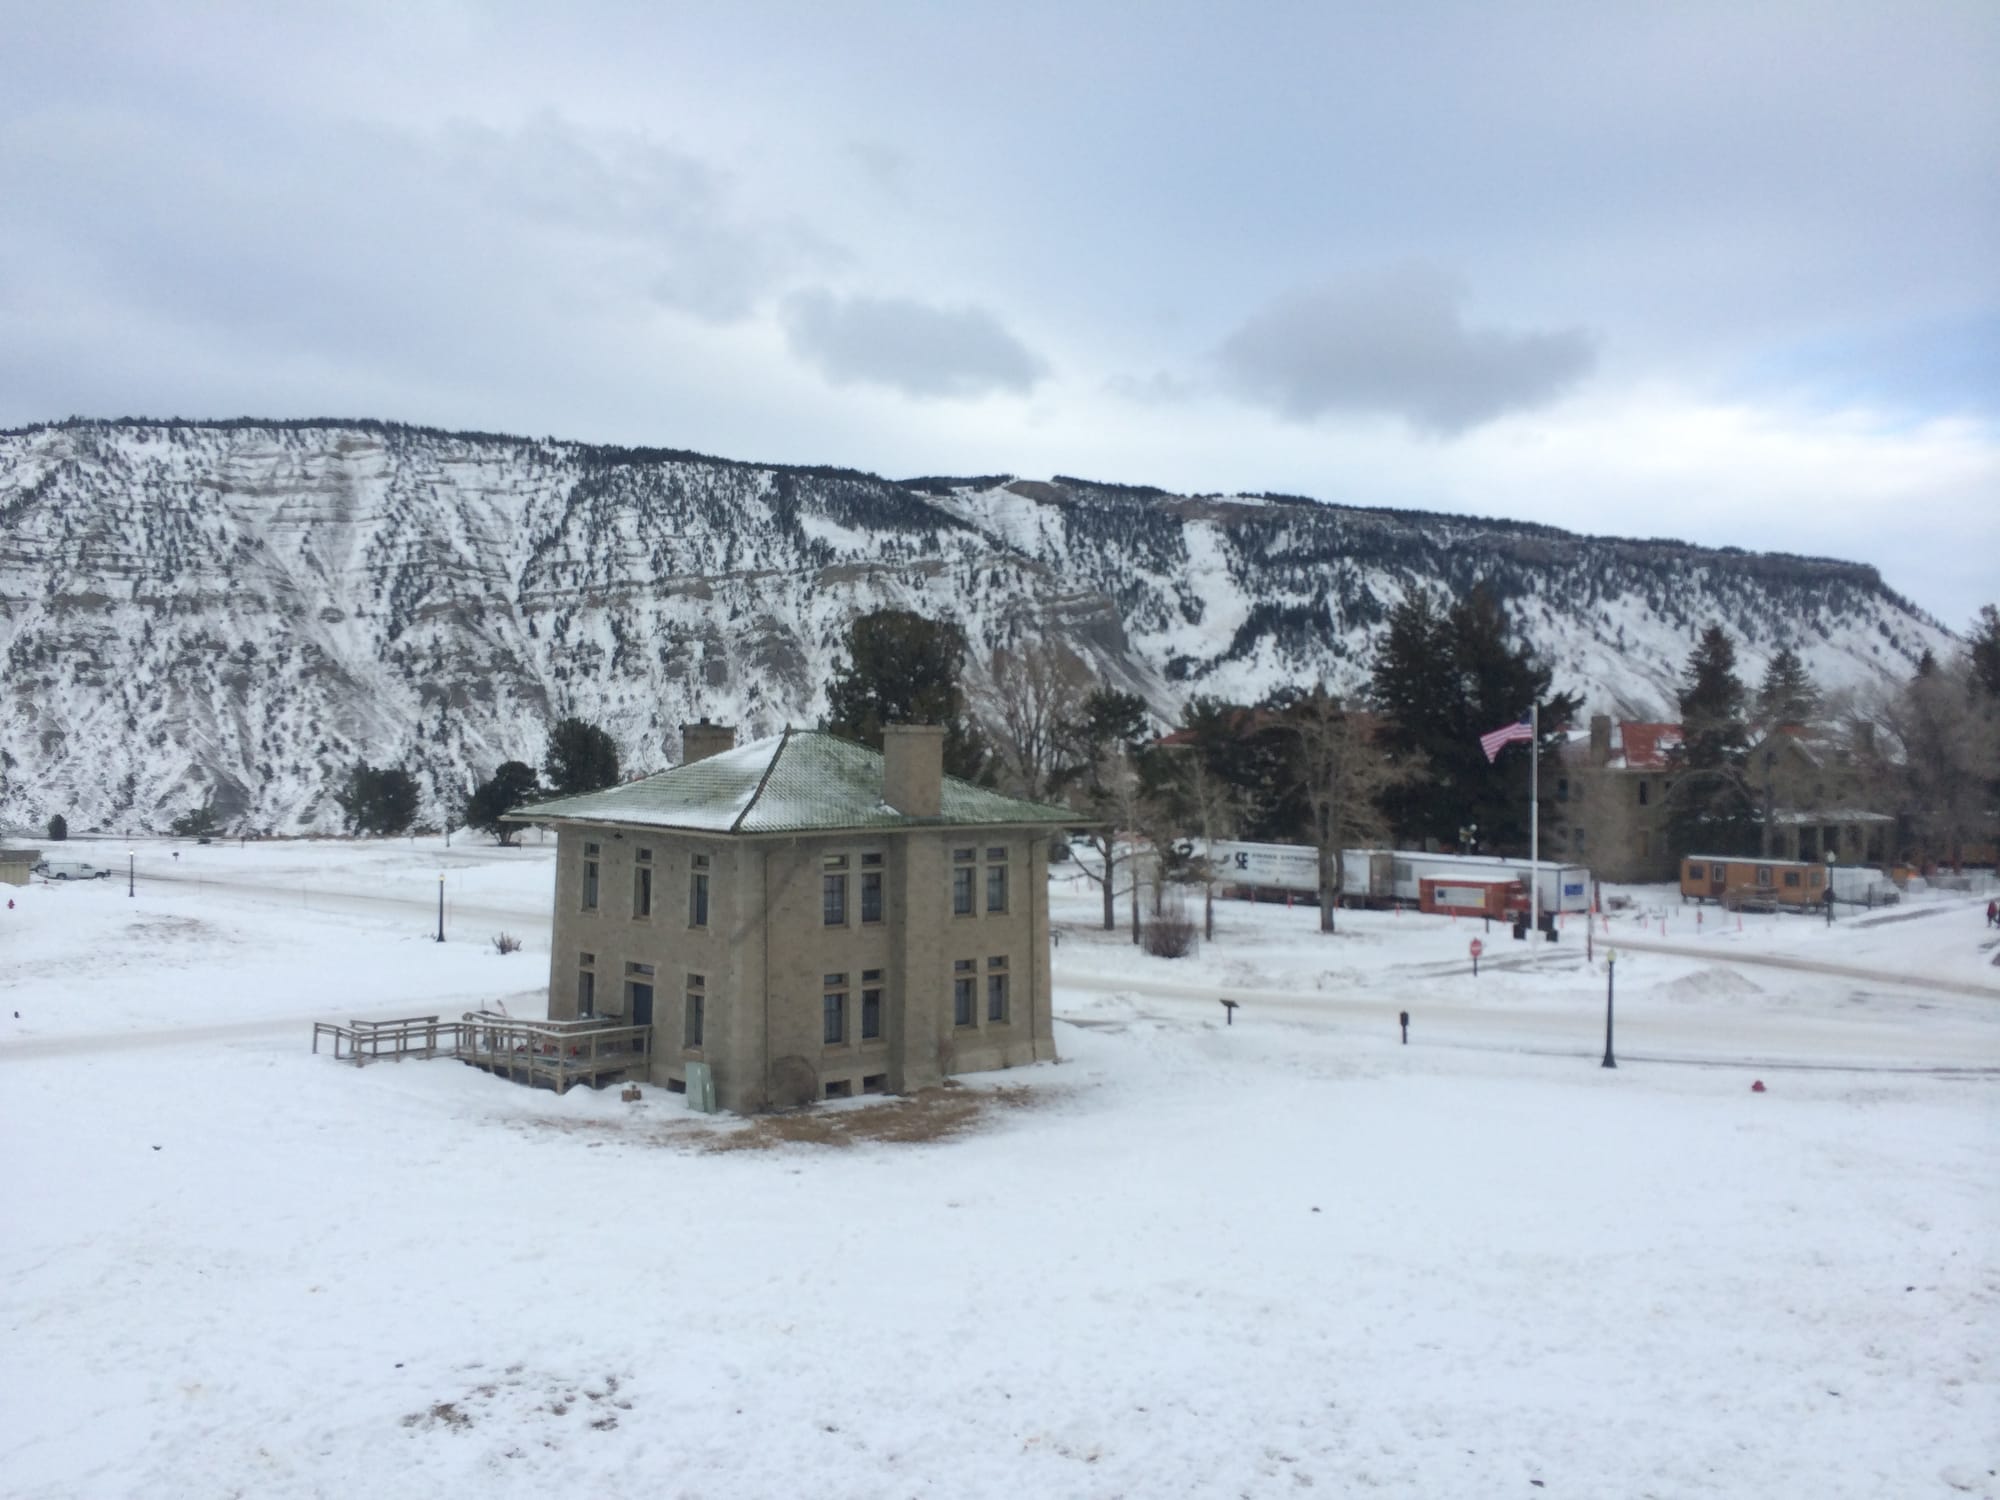 Photo by Author — view from the room — not the odd ‘block house’